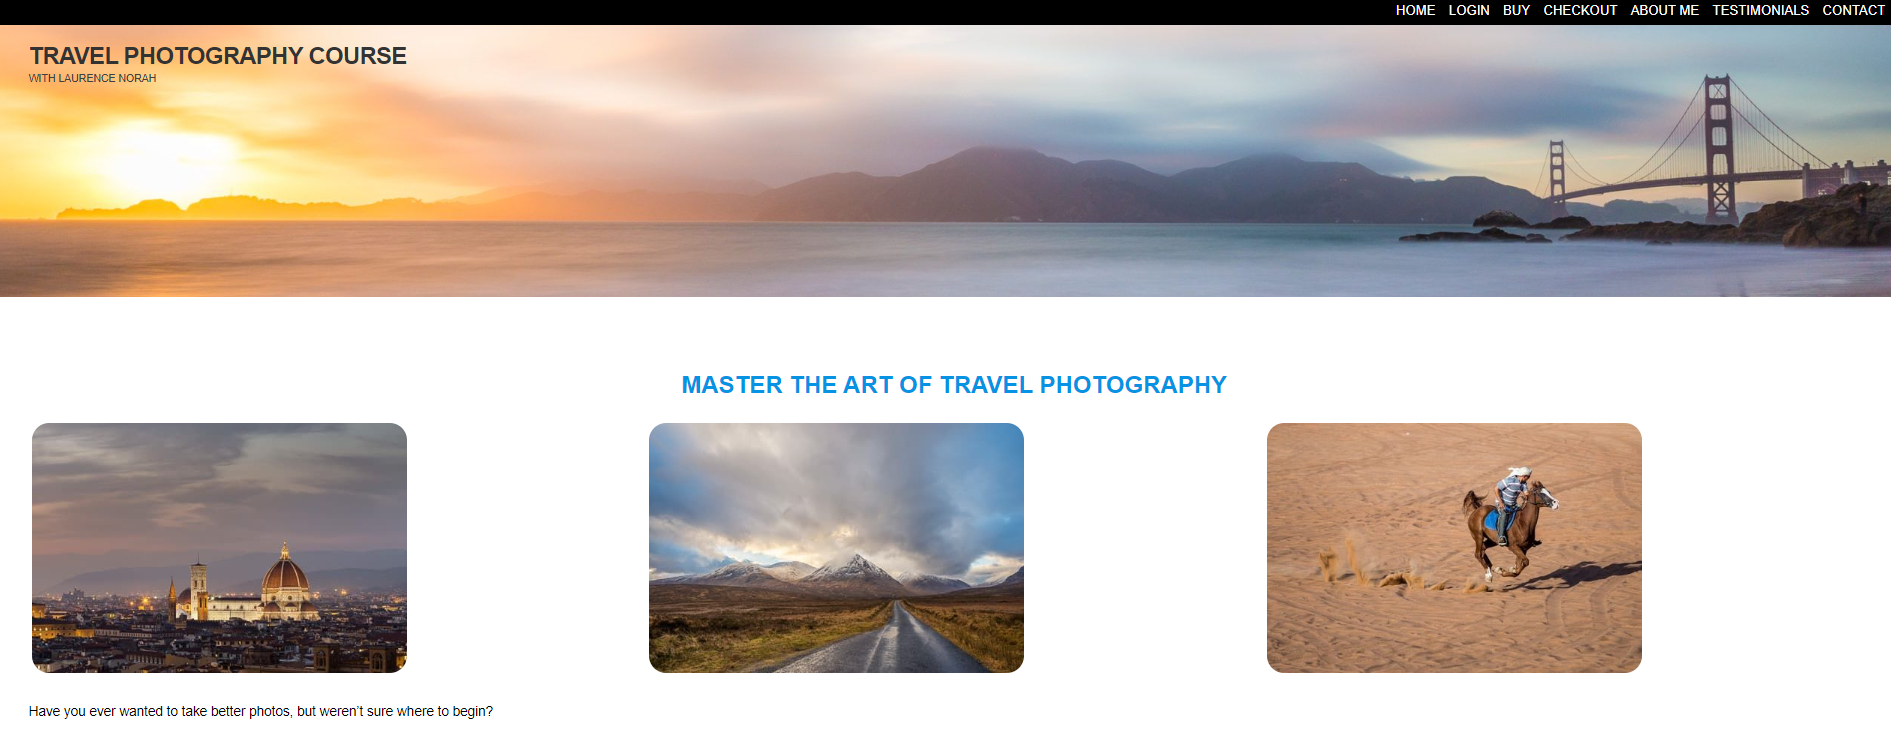 The Travel Photography Course